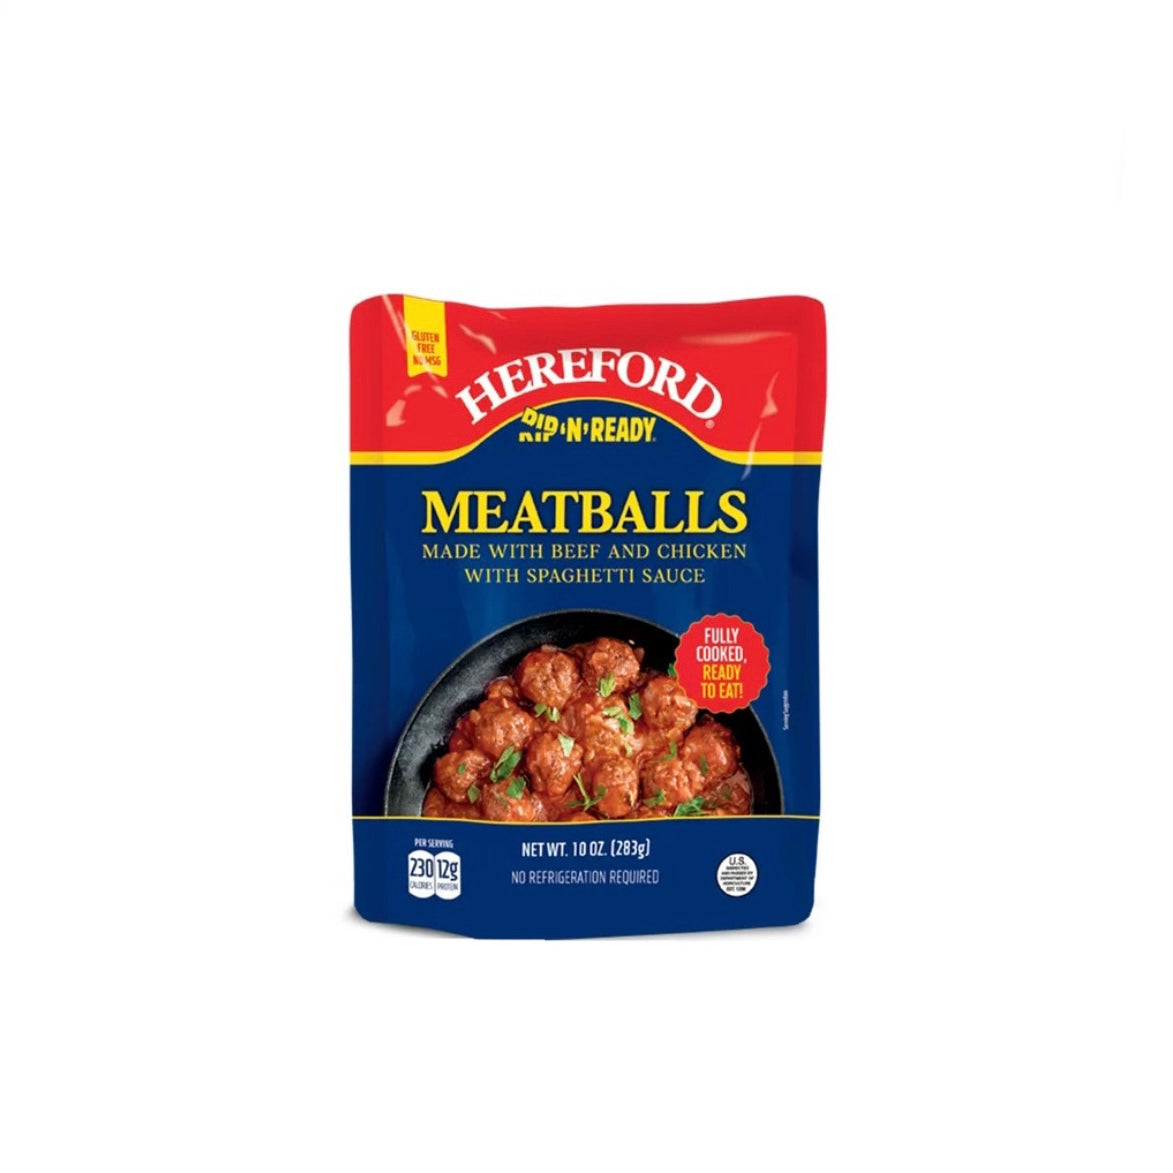 Hereford Meatballs with Spaghetti Sauce Pouch (B096G7)